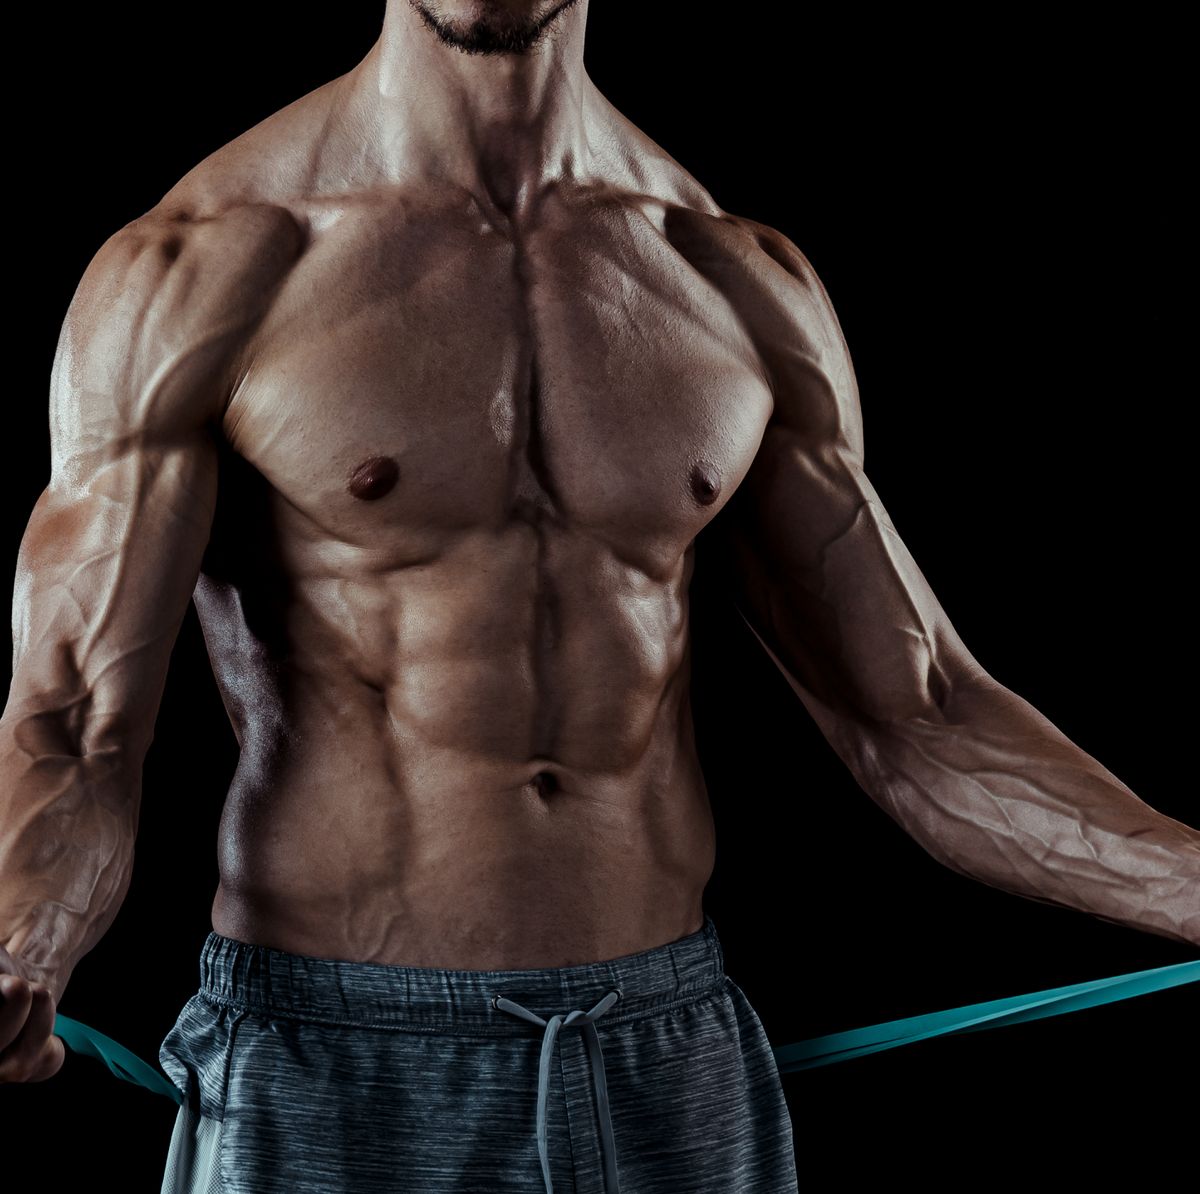 An Upper Chest Workout for Defined Pecs